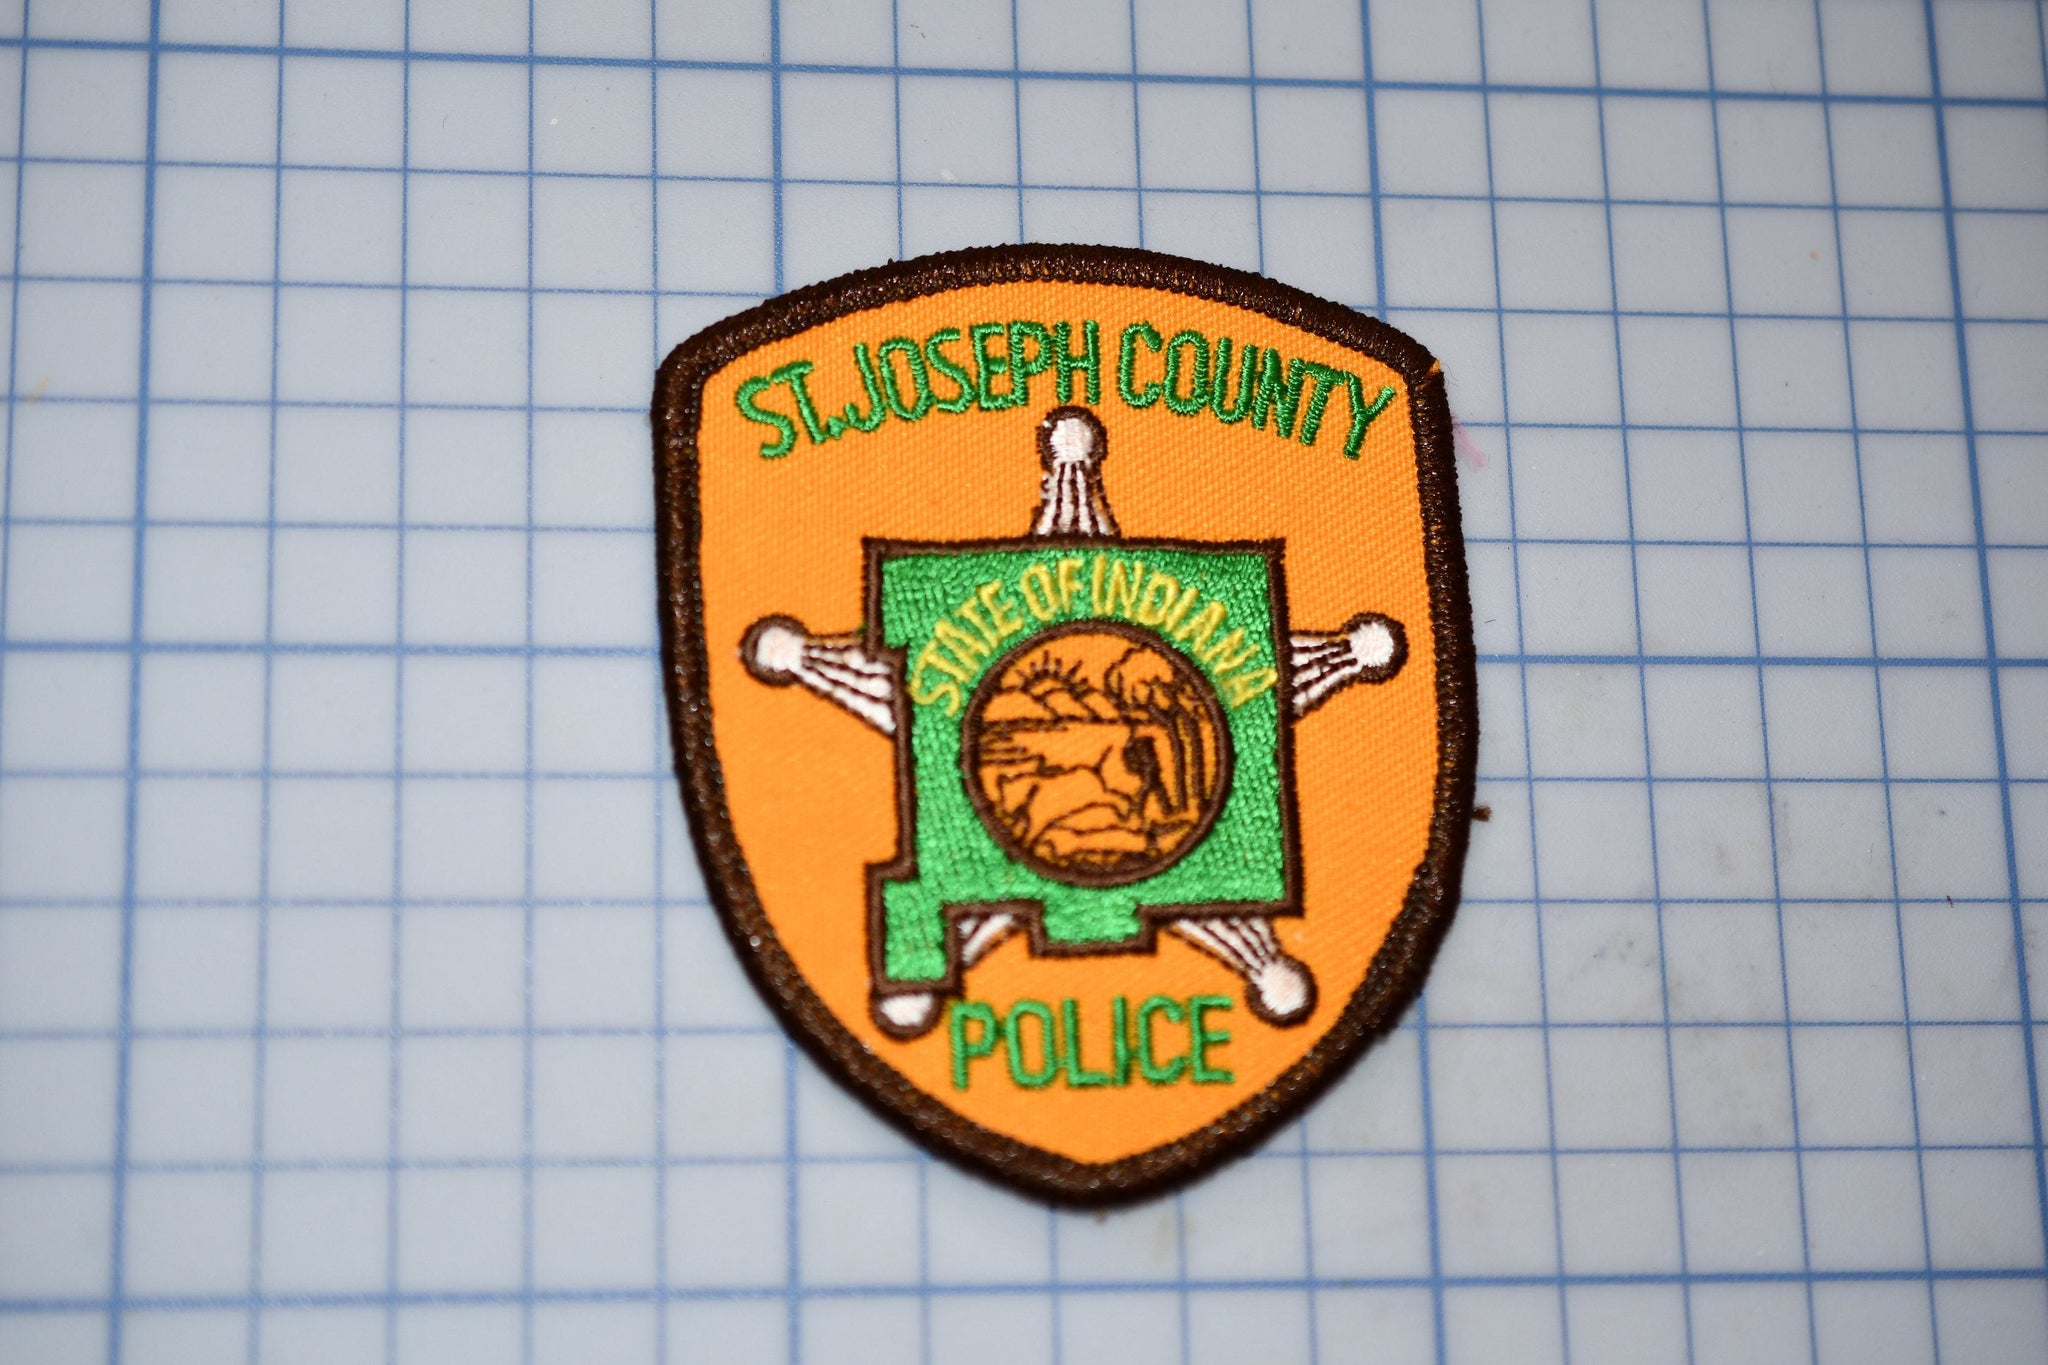 St. Joseph County Indiana Police CAP Patch (S4-300)